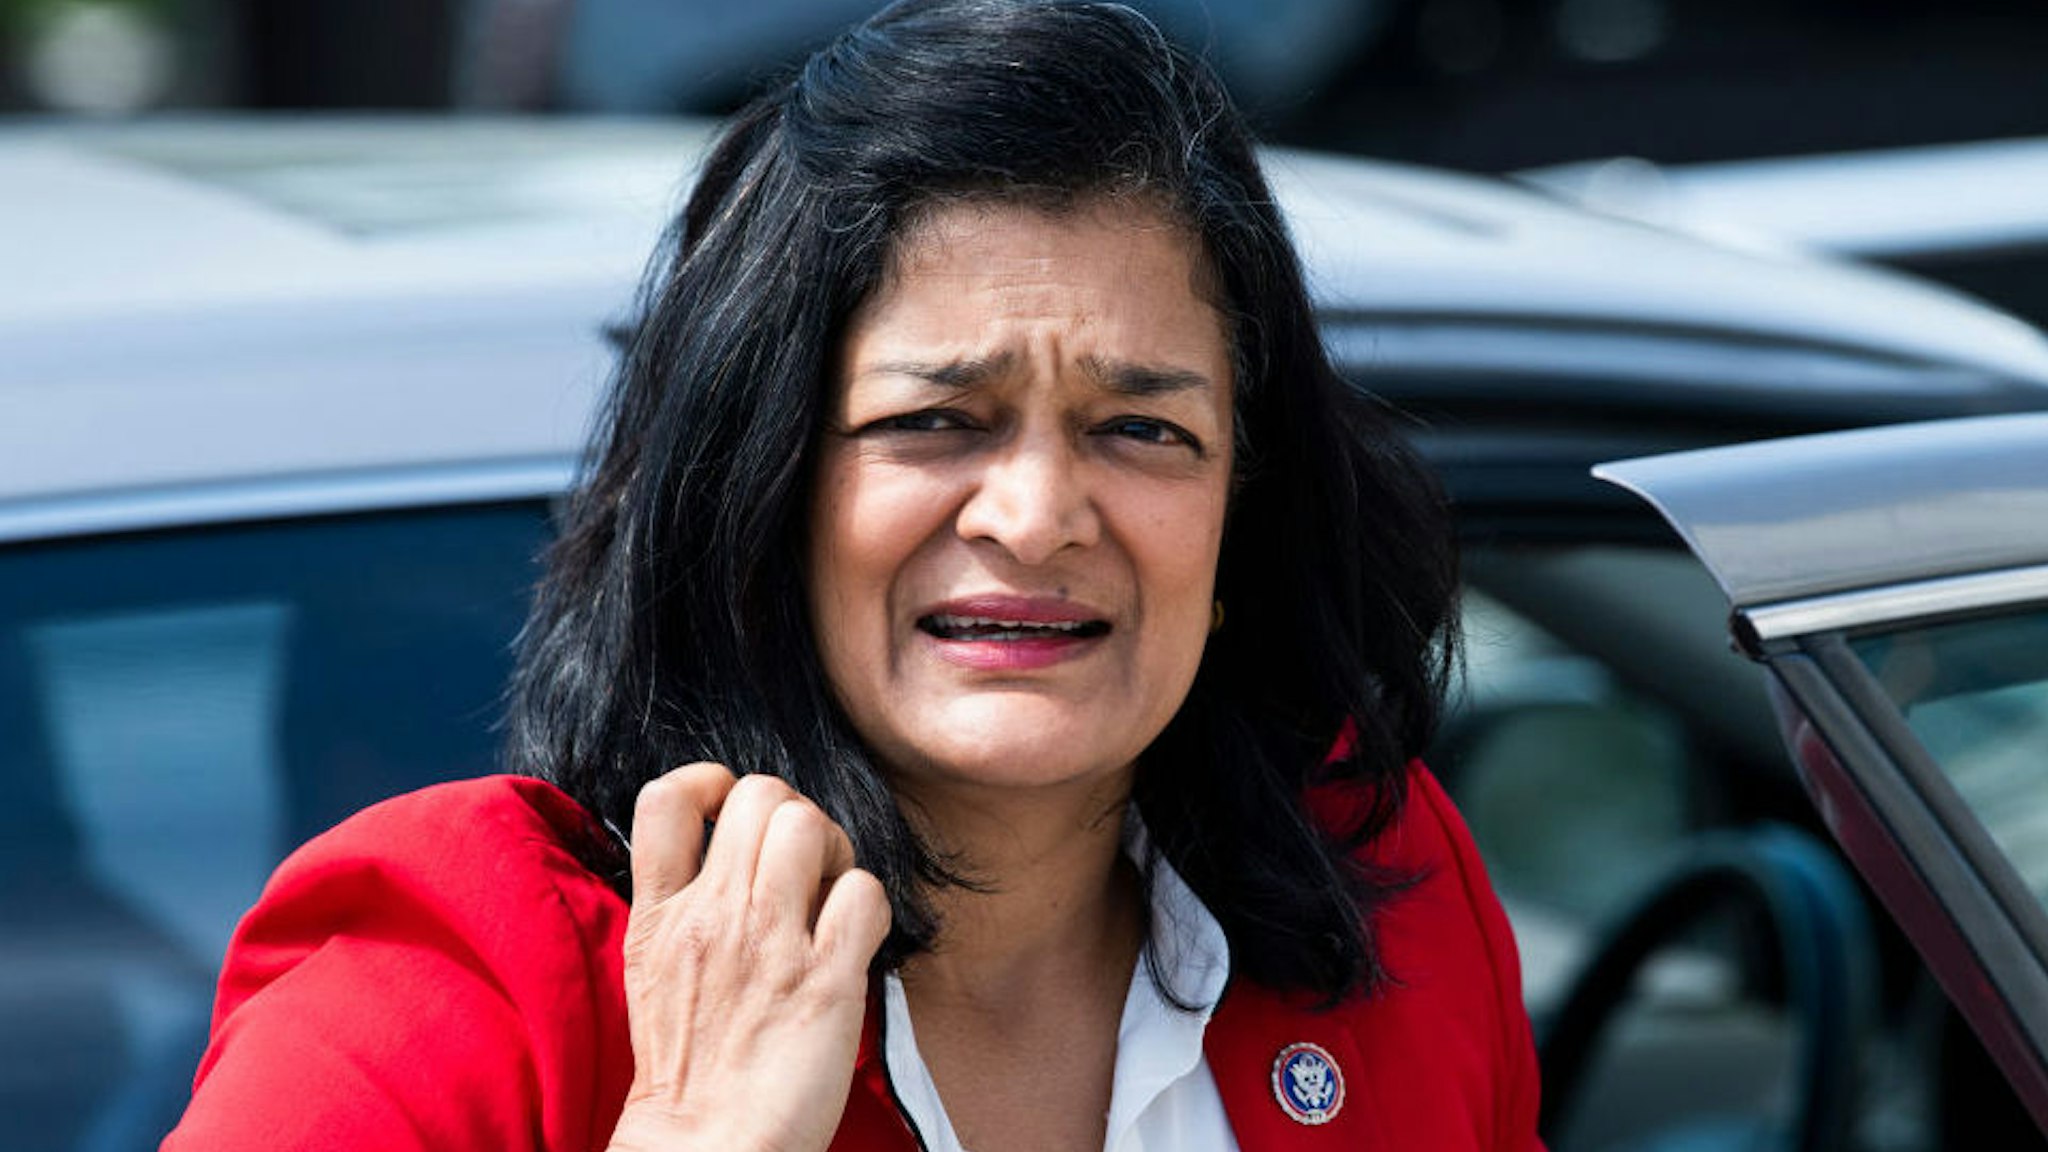 UNITED STATES - MAY 20: Rep. Pramila Jayapal, D-Wash., is seen at the House steps of the Capitol during the last votes of the week on Thursday, May 20, 2021.